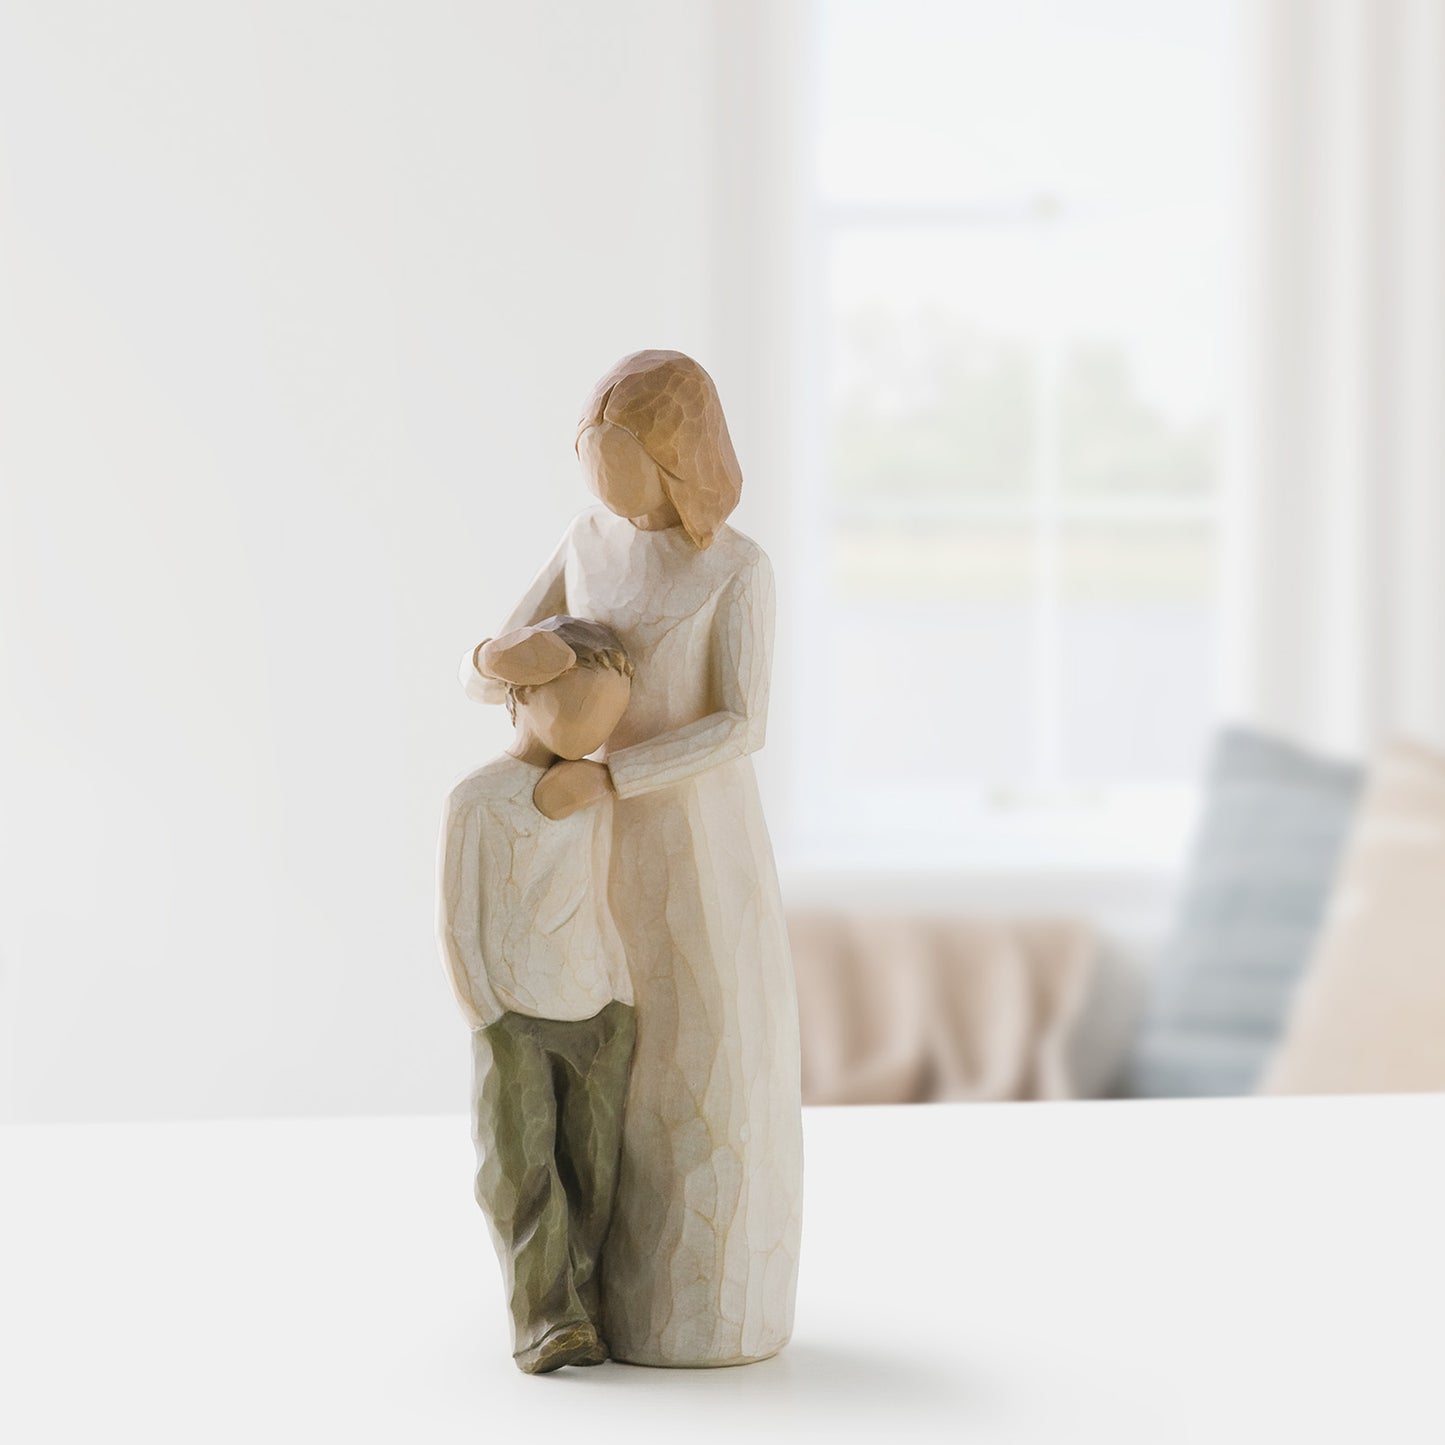 Willow Tree Mother and Son Figurine